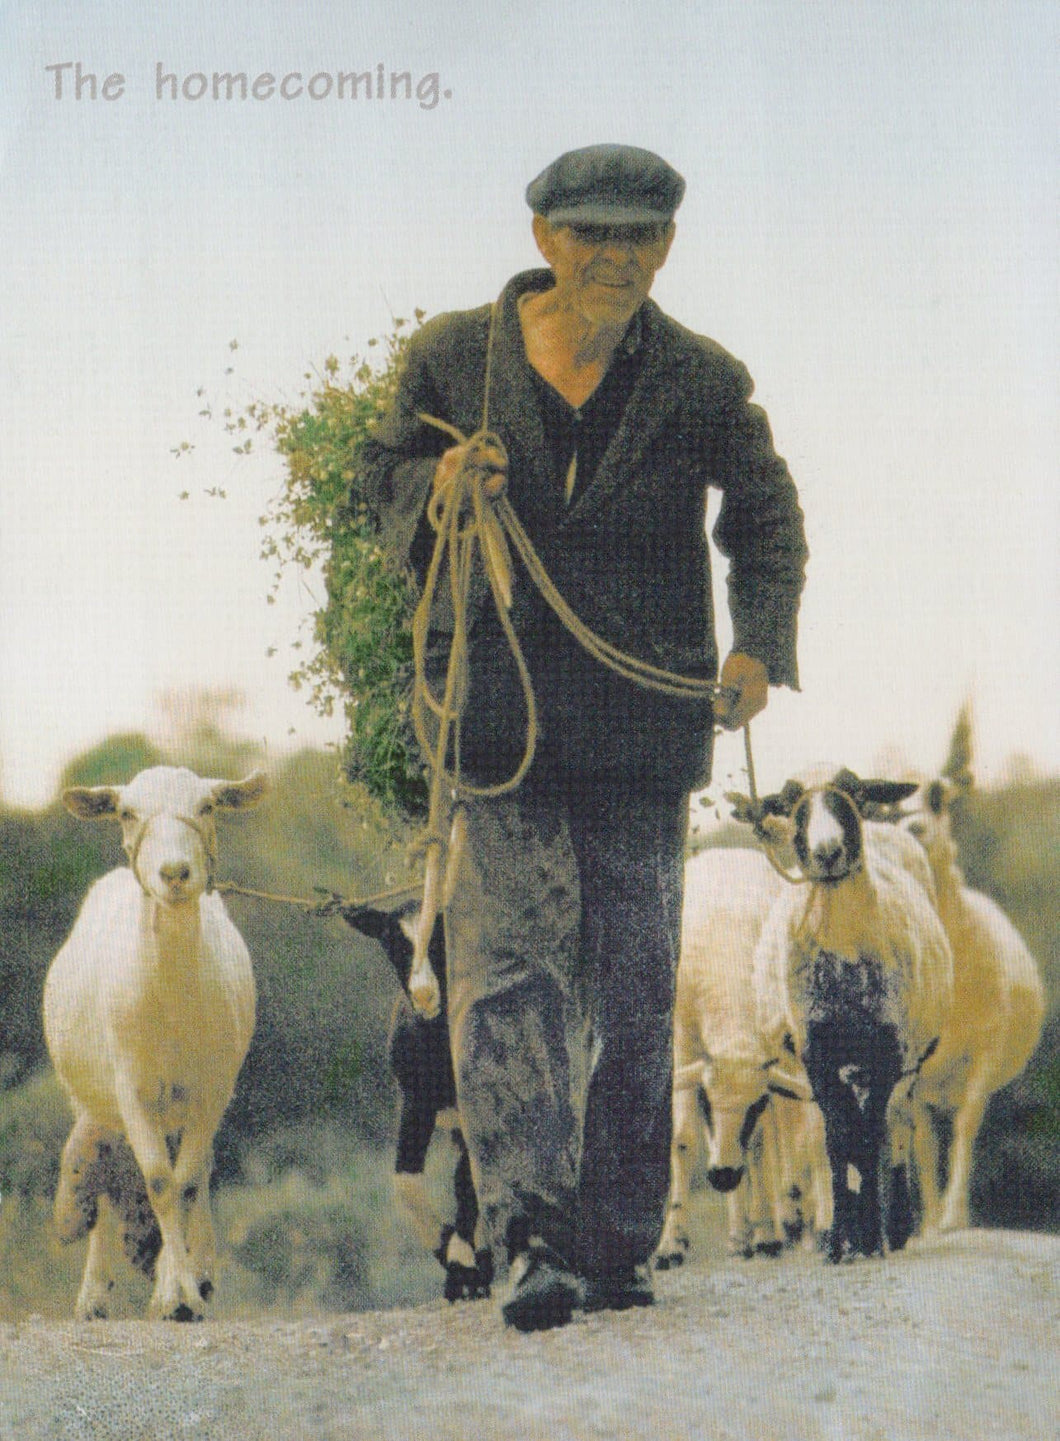 Greece Postcard - The Homecoming - Man With Goats - Mo’s Postcards 